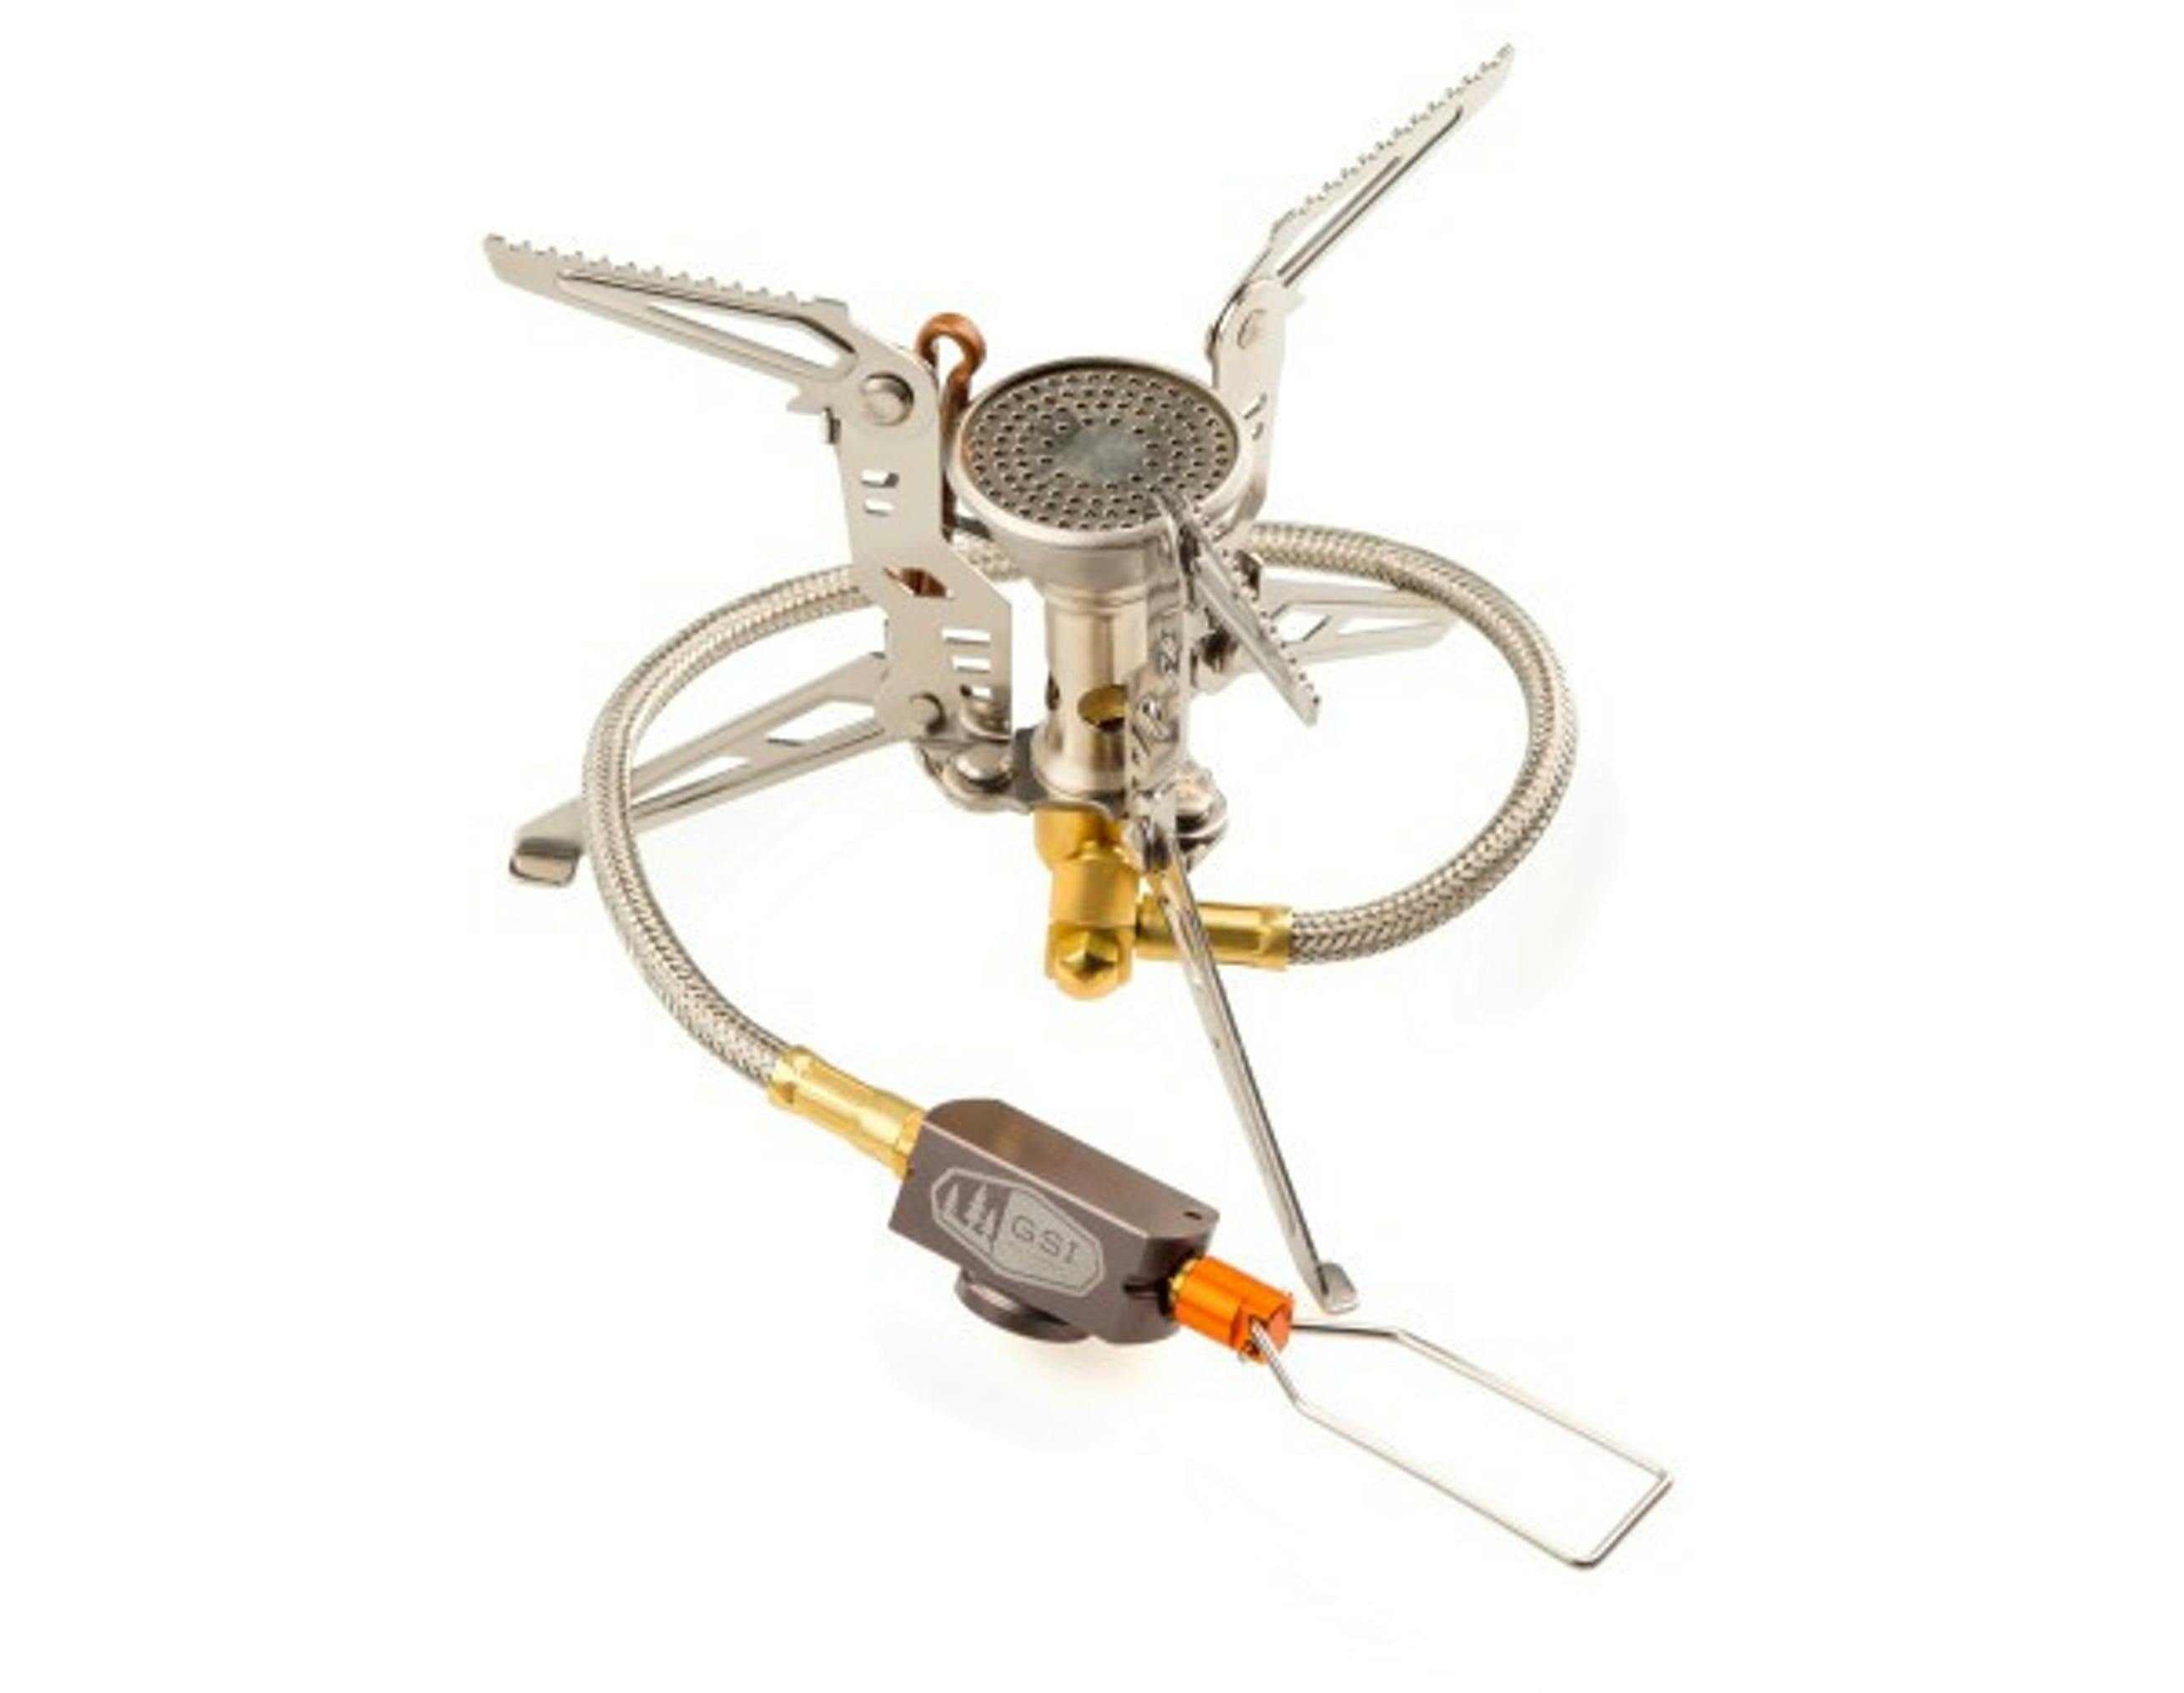 Product image of the GSI Outdoors - Pinnacle 4 Season Remote Stove.